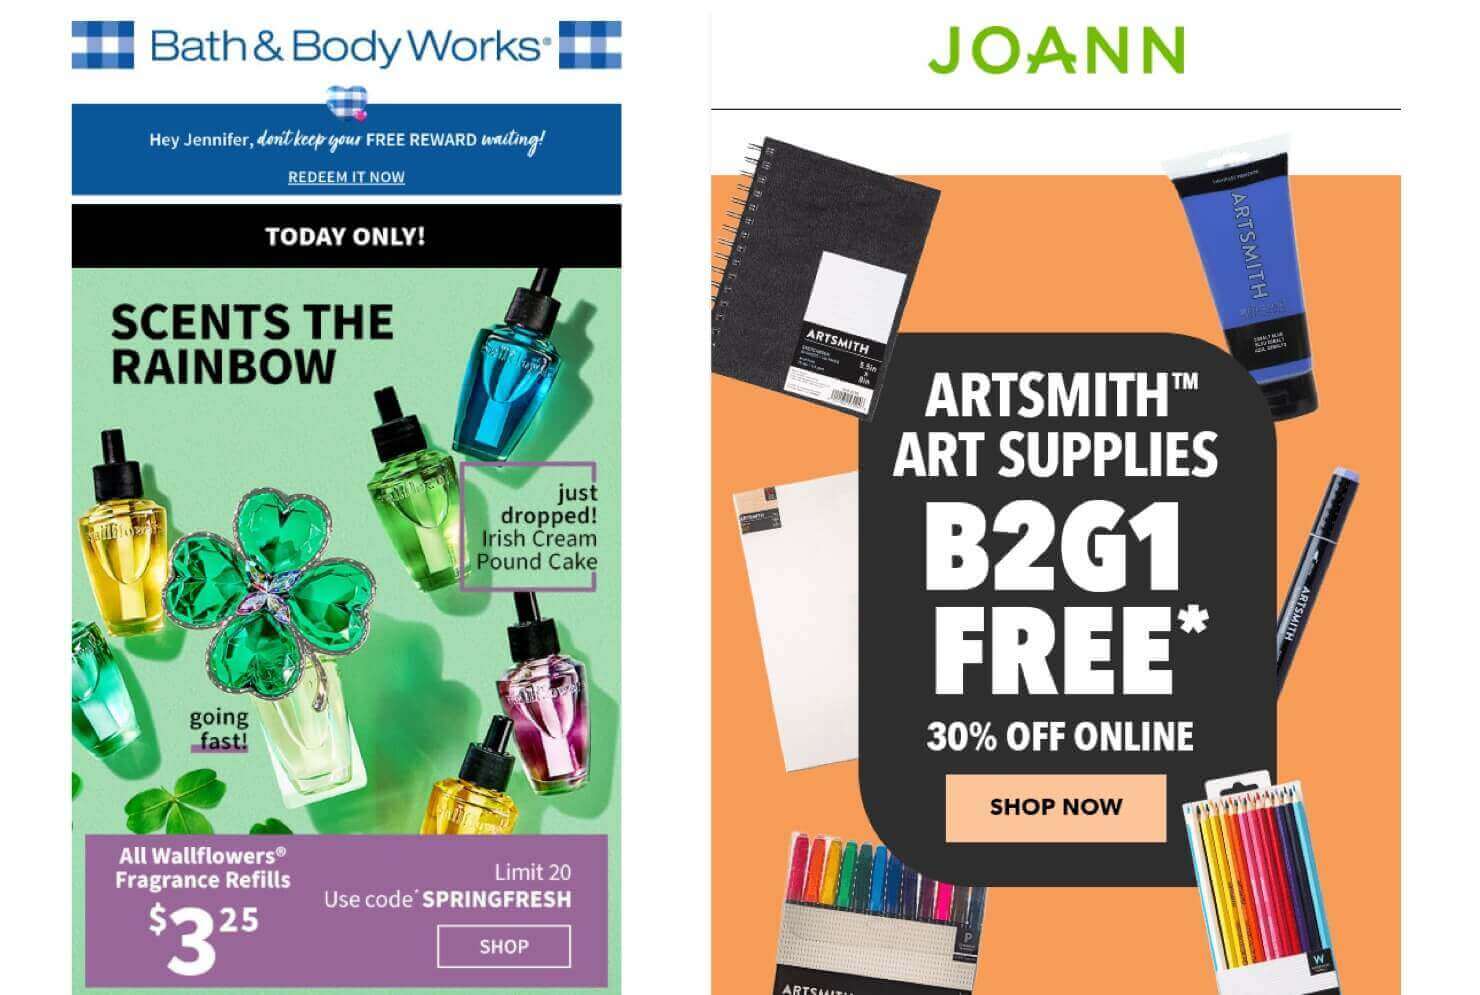 Screenshots of 2 eCommerce email examples. 1. Bath and Body Works email that promotes their Wallflowers Fragrance Refills for .25. There's a coupon code to use." 2. Email from Joann that says, "ARTSMITH™ ART SUPPLIES B2G1 FREE* 30% OFF ONLINE" with a "Show Now" CTA button.